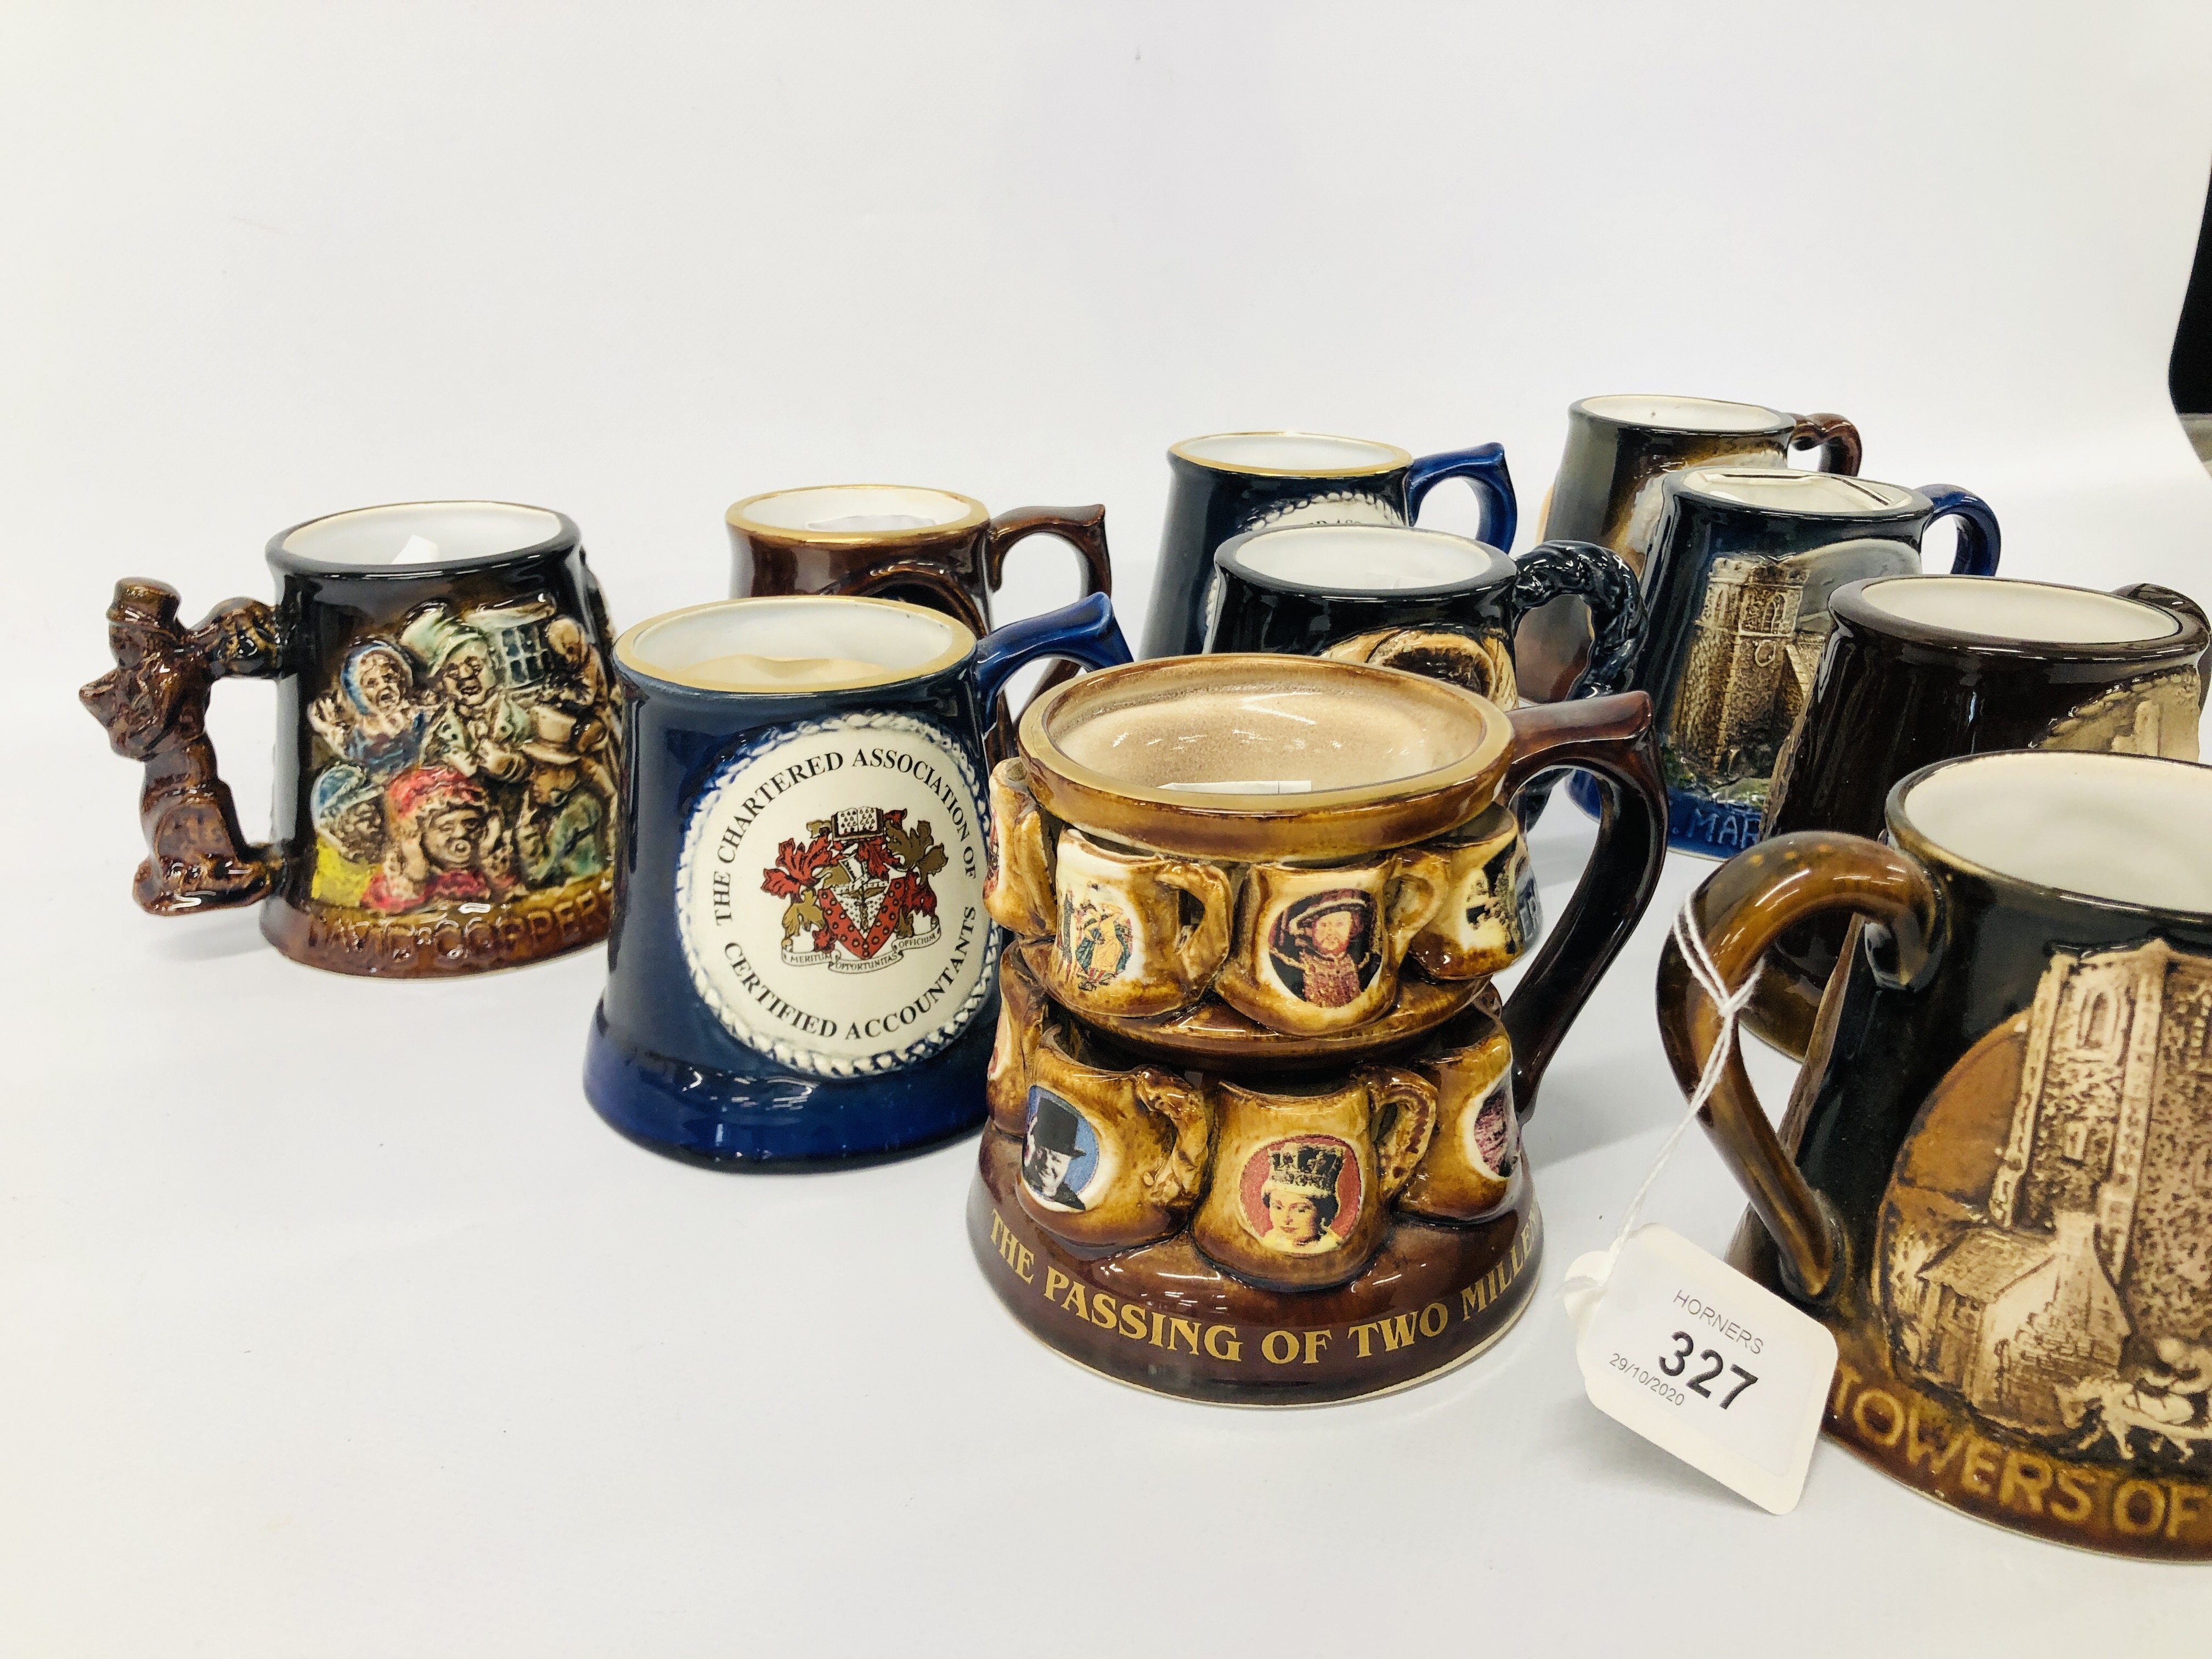 10 x VARIOUS YARMOUTH POTTERY MUGS MANY WITH CERTIFICATES - Image 2 of 3